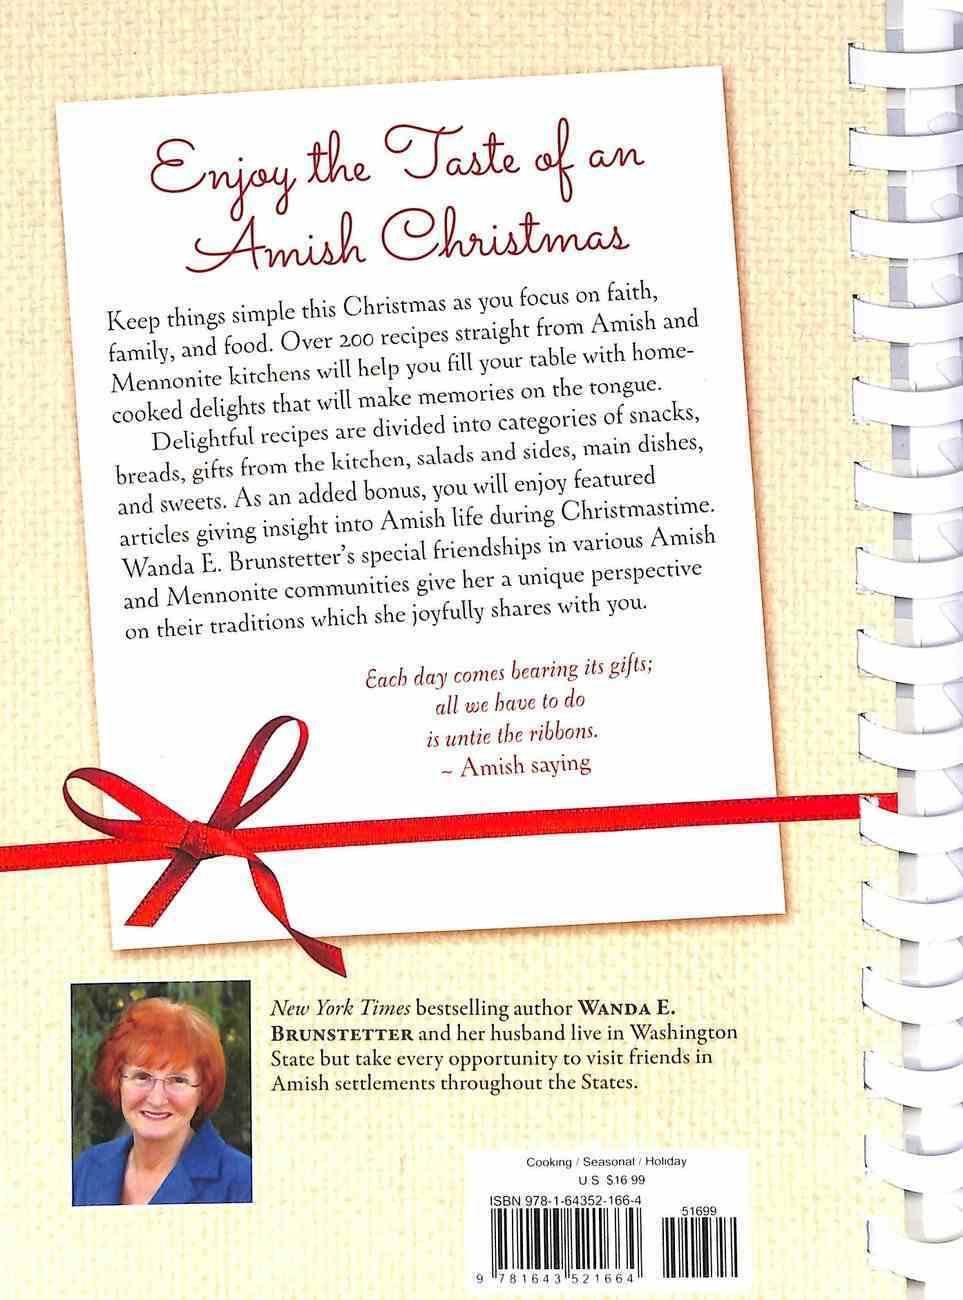 Amish Friends Christmas Cookbook Spiral